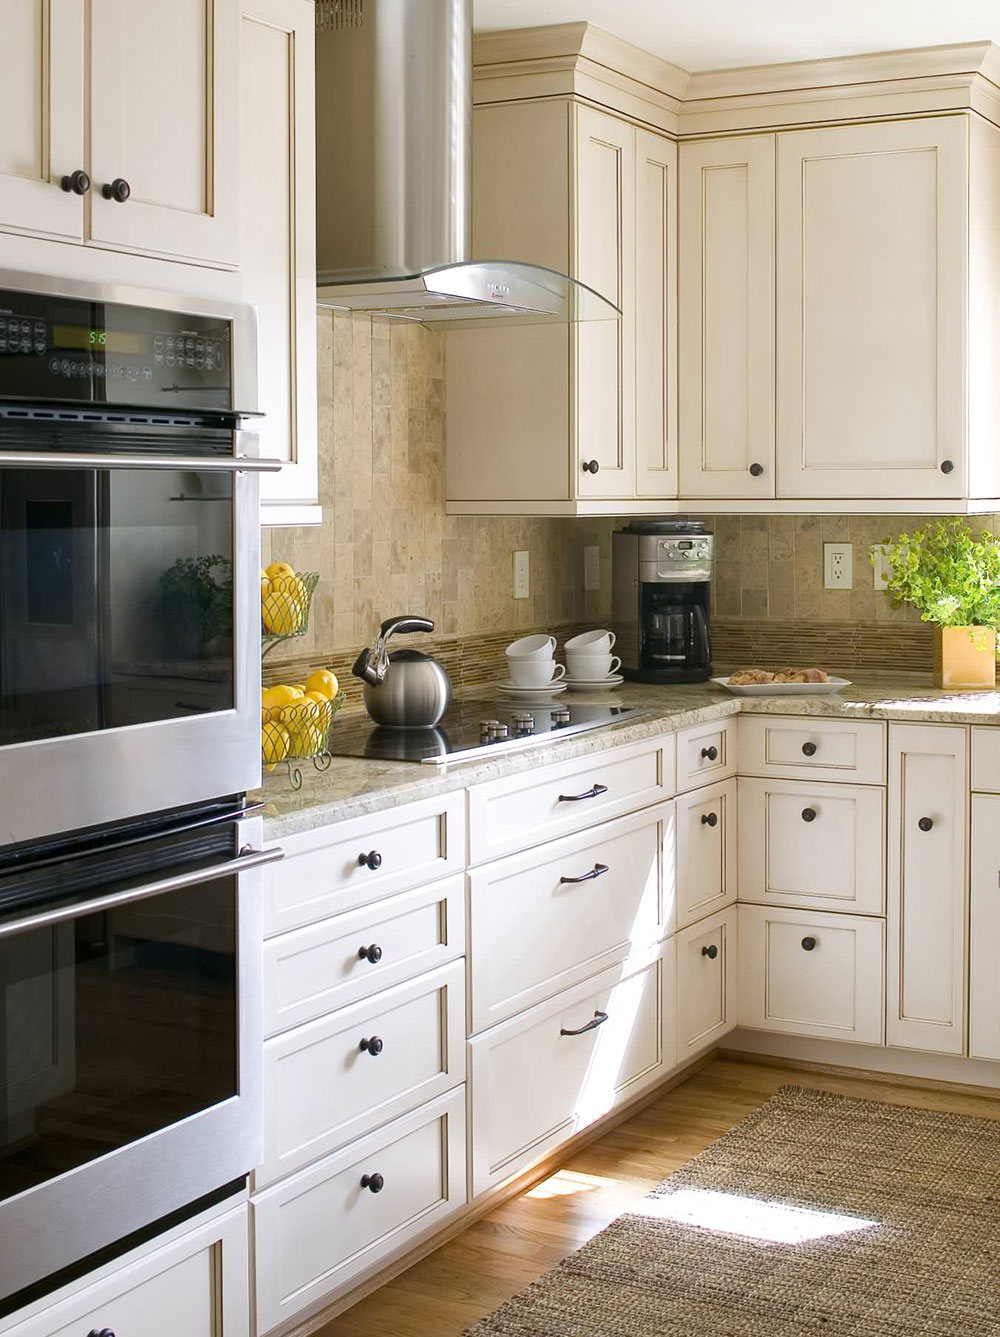 Better-Homes-Gardens-Featured-Kitchen-by-Kitchen-Planners How to Update Kitchen Cabinets Without Replacing Them